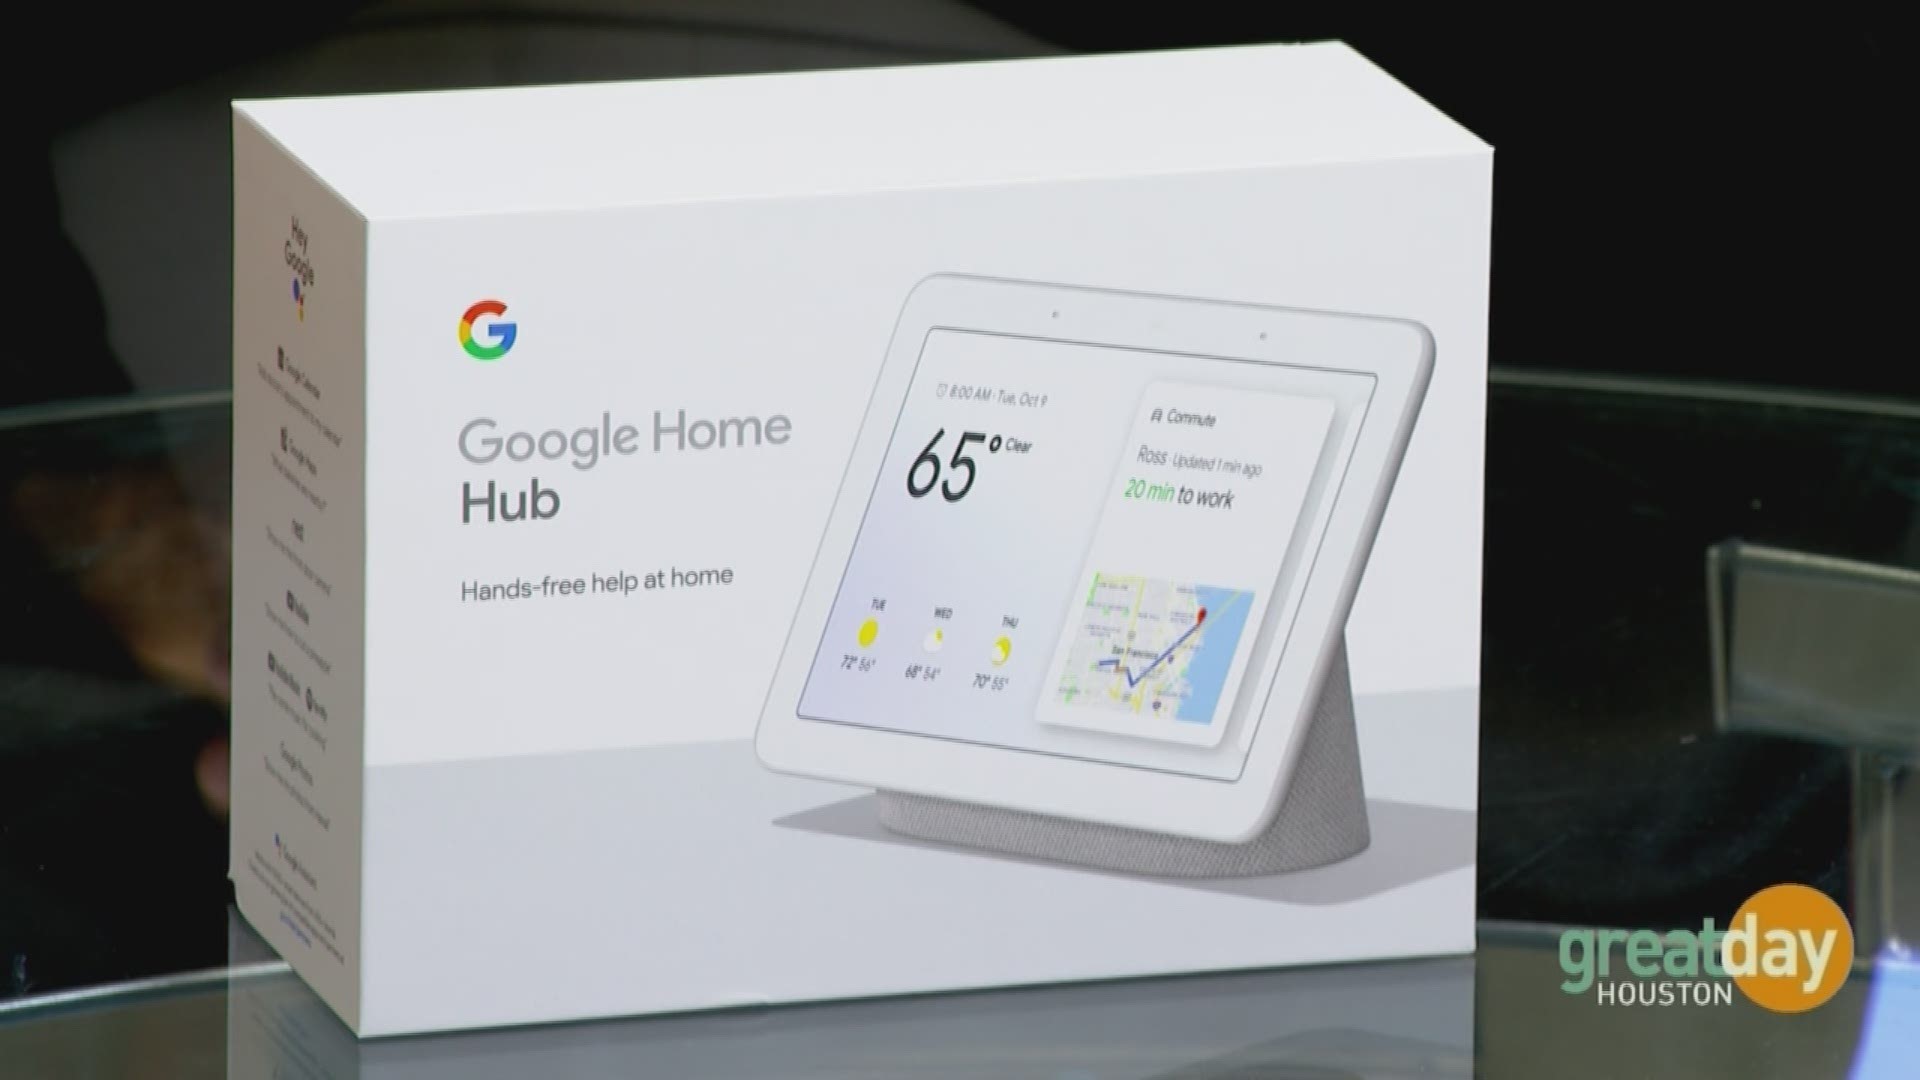 Scott Burns with Reliant explains how Reliant can give you a truly free weekend, as well as how to optimize your power plan with a Google Home Hub.